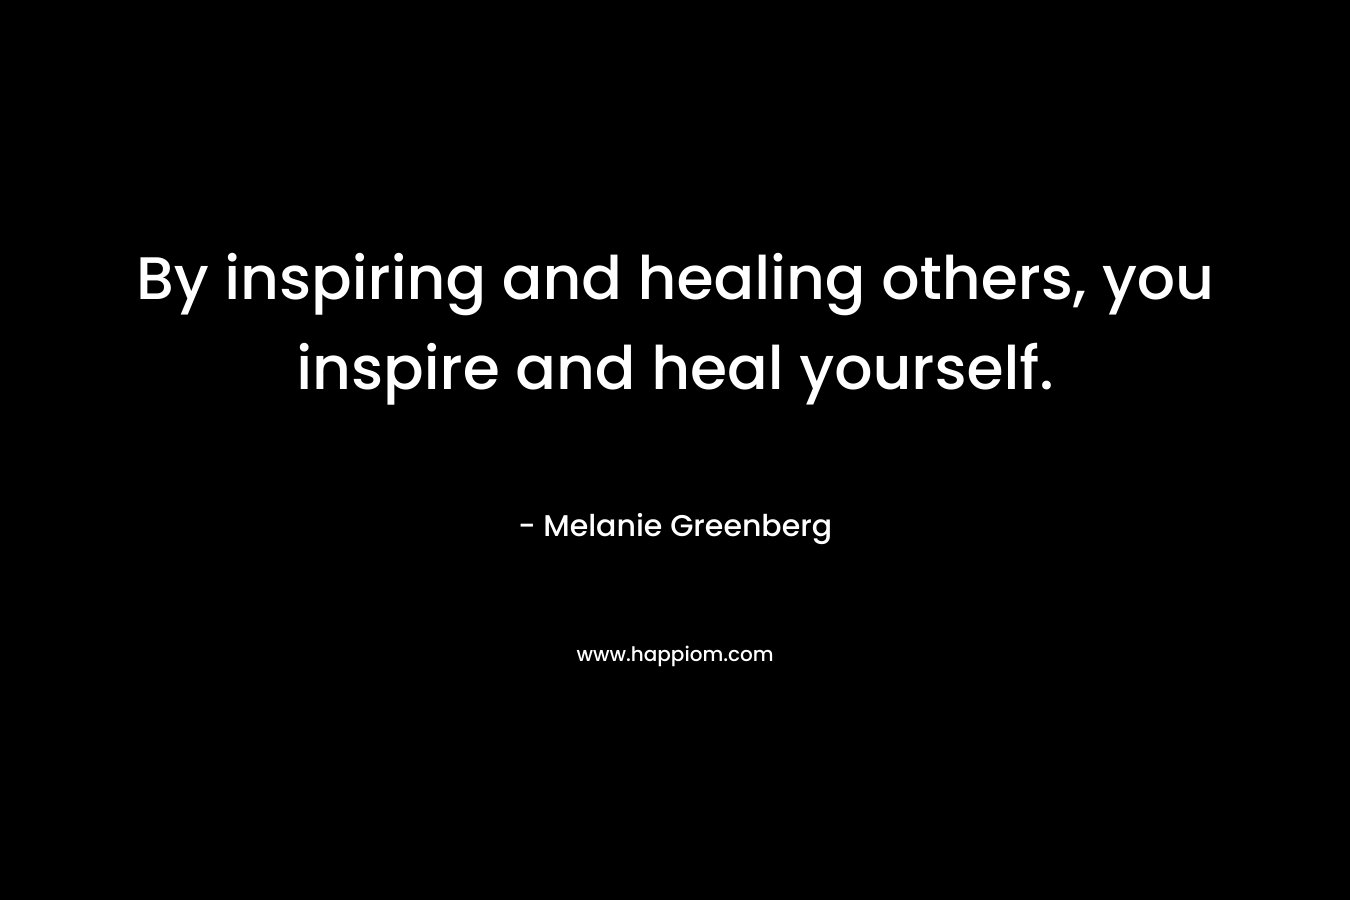 By inspiring and healing others, you inspire and heal yourself. – Melanie Greenberg